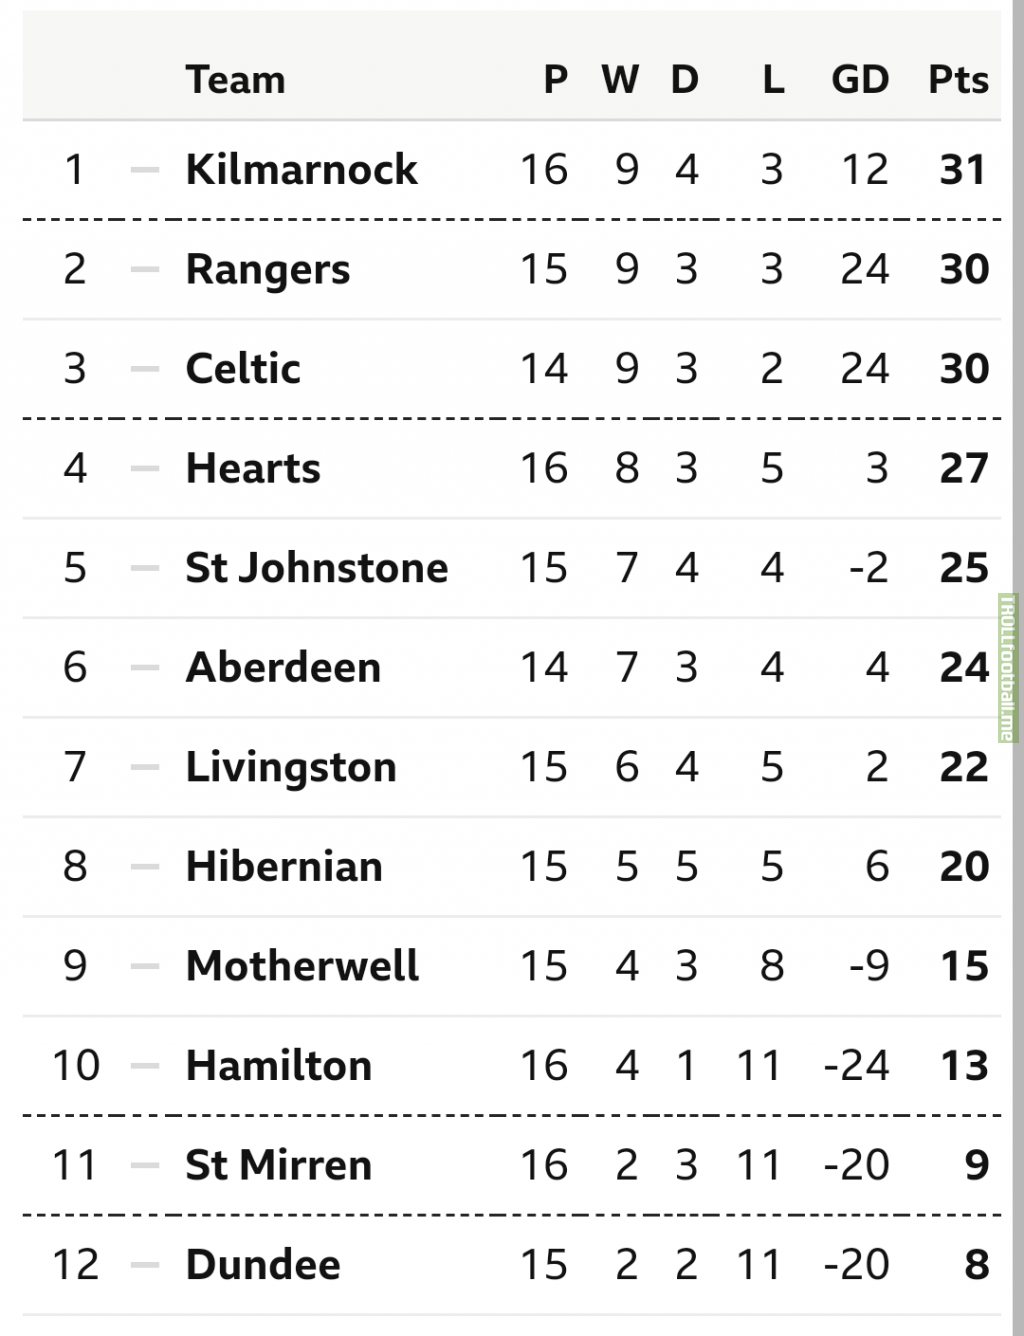 After 16 games played, Kilmarnock are 1st in the Scottish Premiership